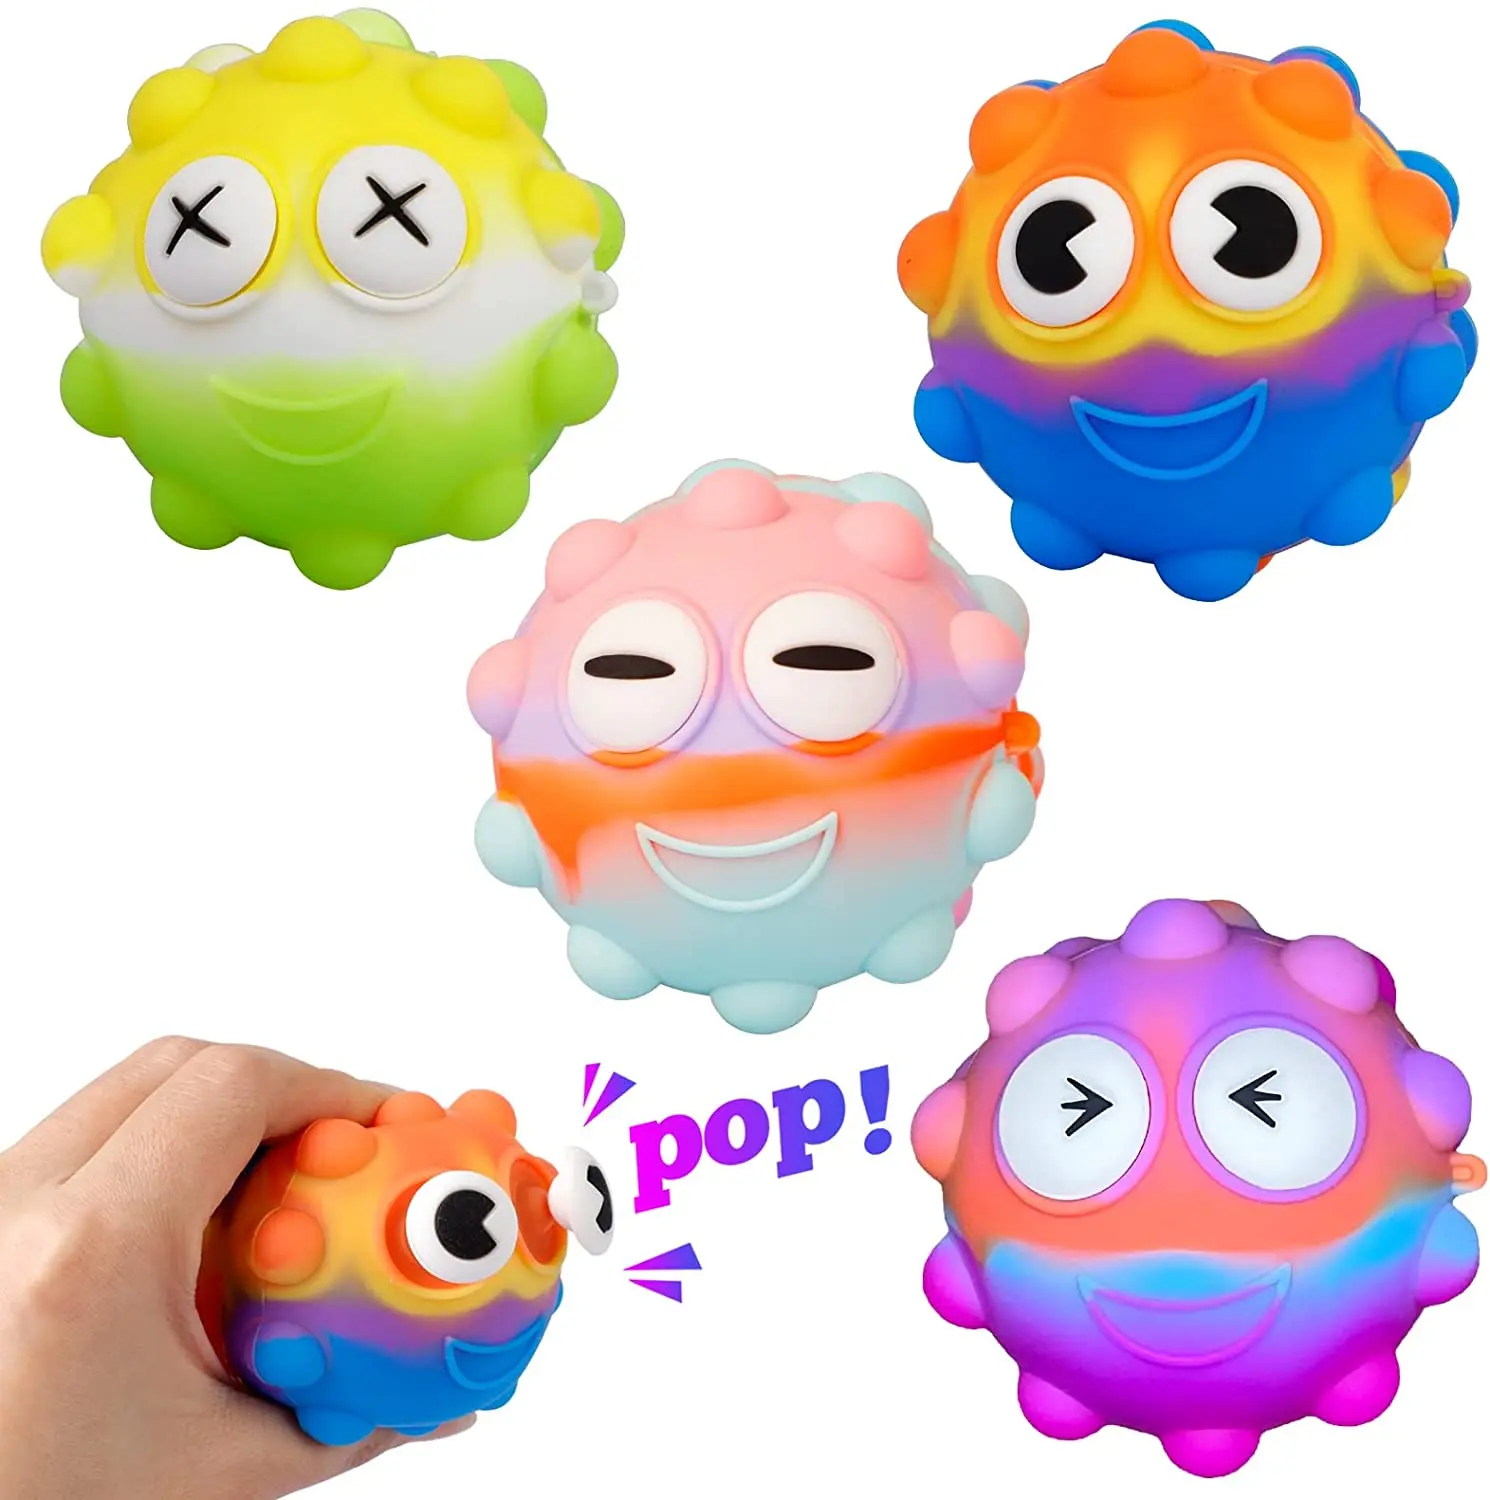 Pop Stress Balls Fidget Sensory Toys Fidget Ball Push Pop Bubble Decompression,3D Silicone Squeeze Ball Fingertip Toy Stress Anxiety Relief for Autistic Kids Adults 